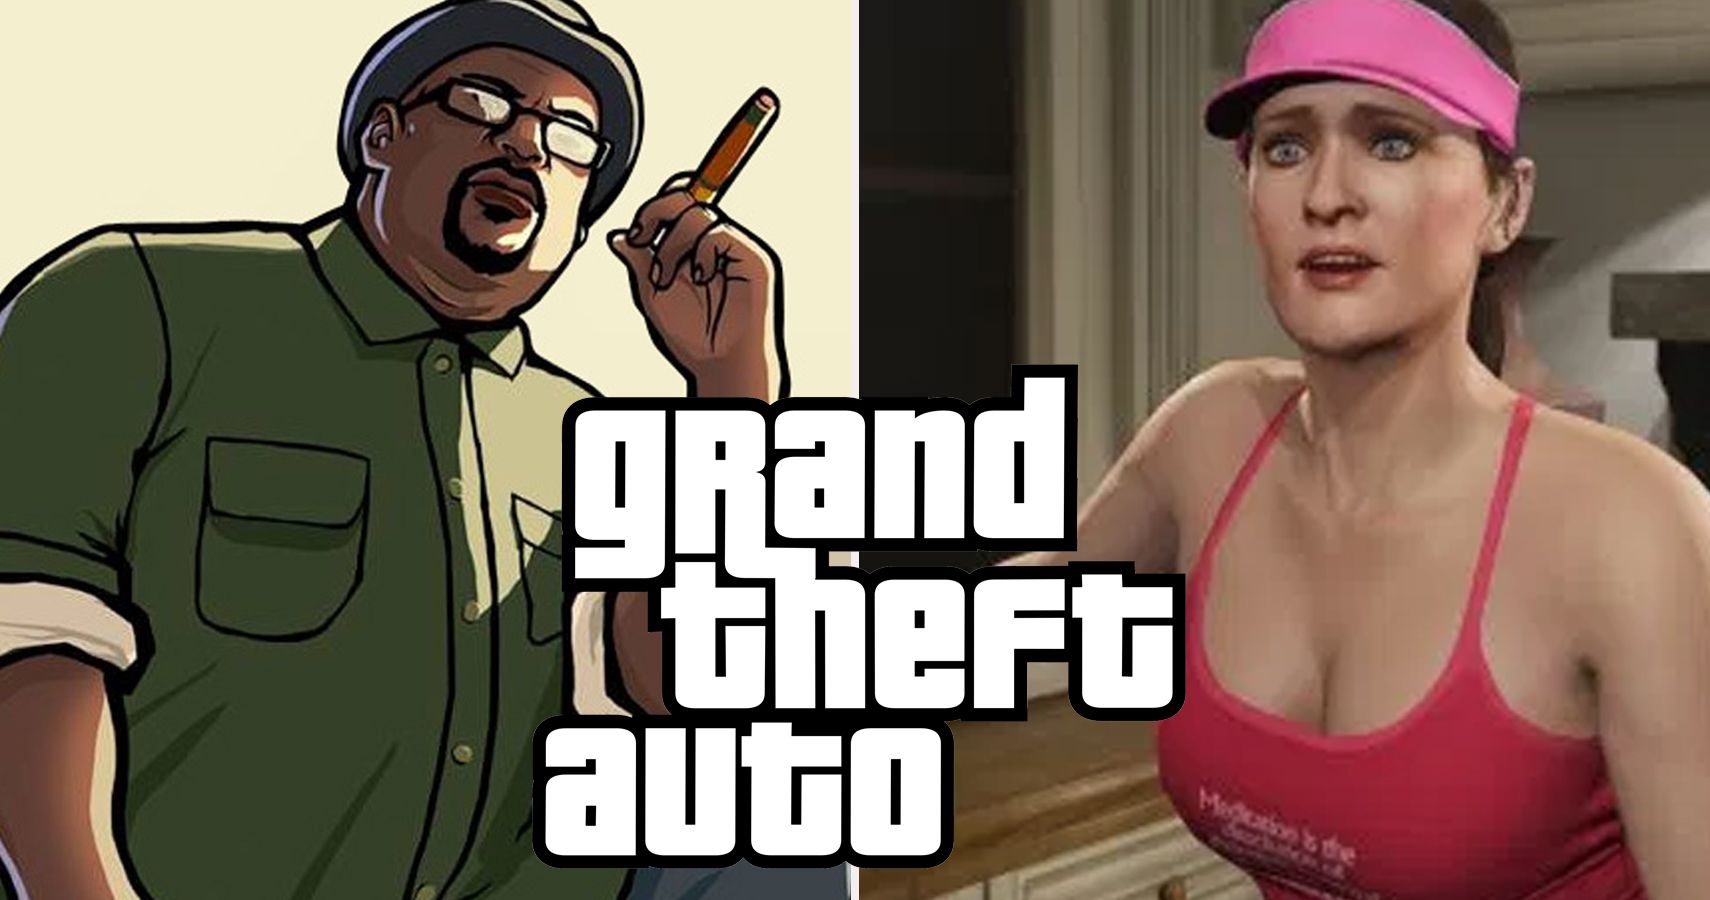 The sexuality of the character in GTA San Andreas: how to cheat